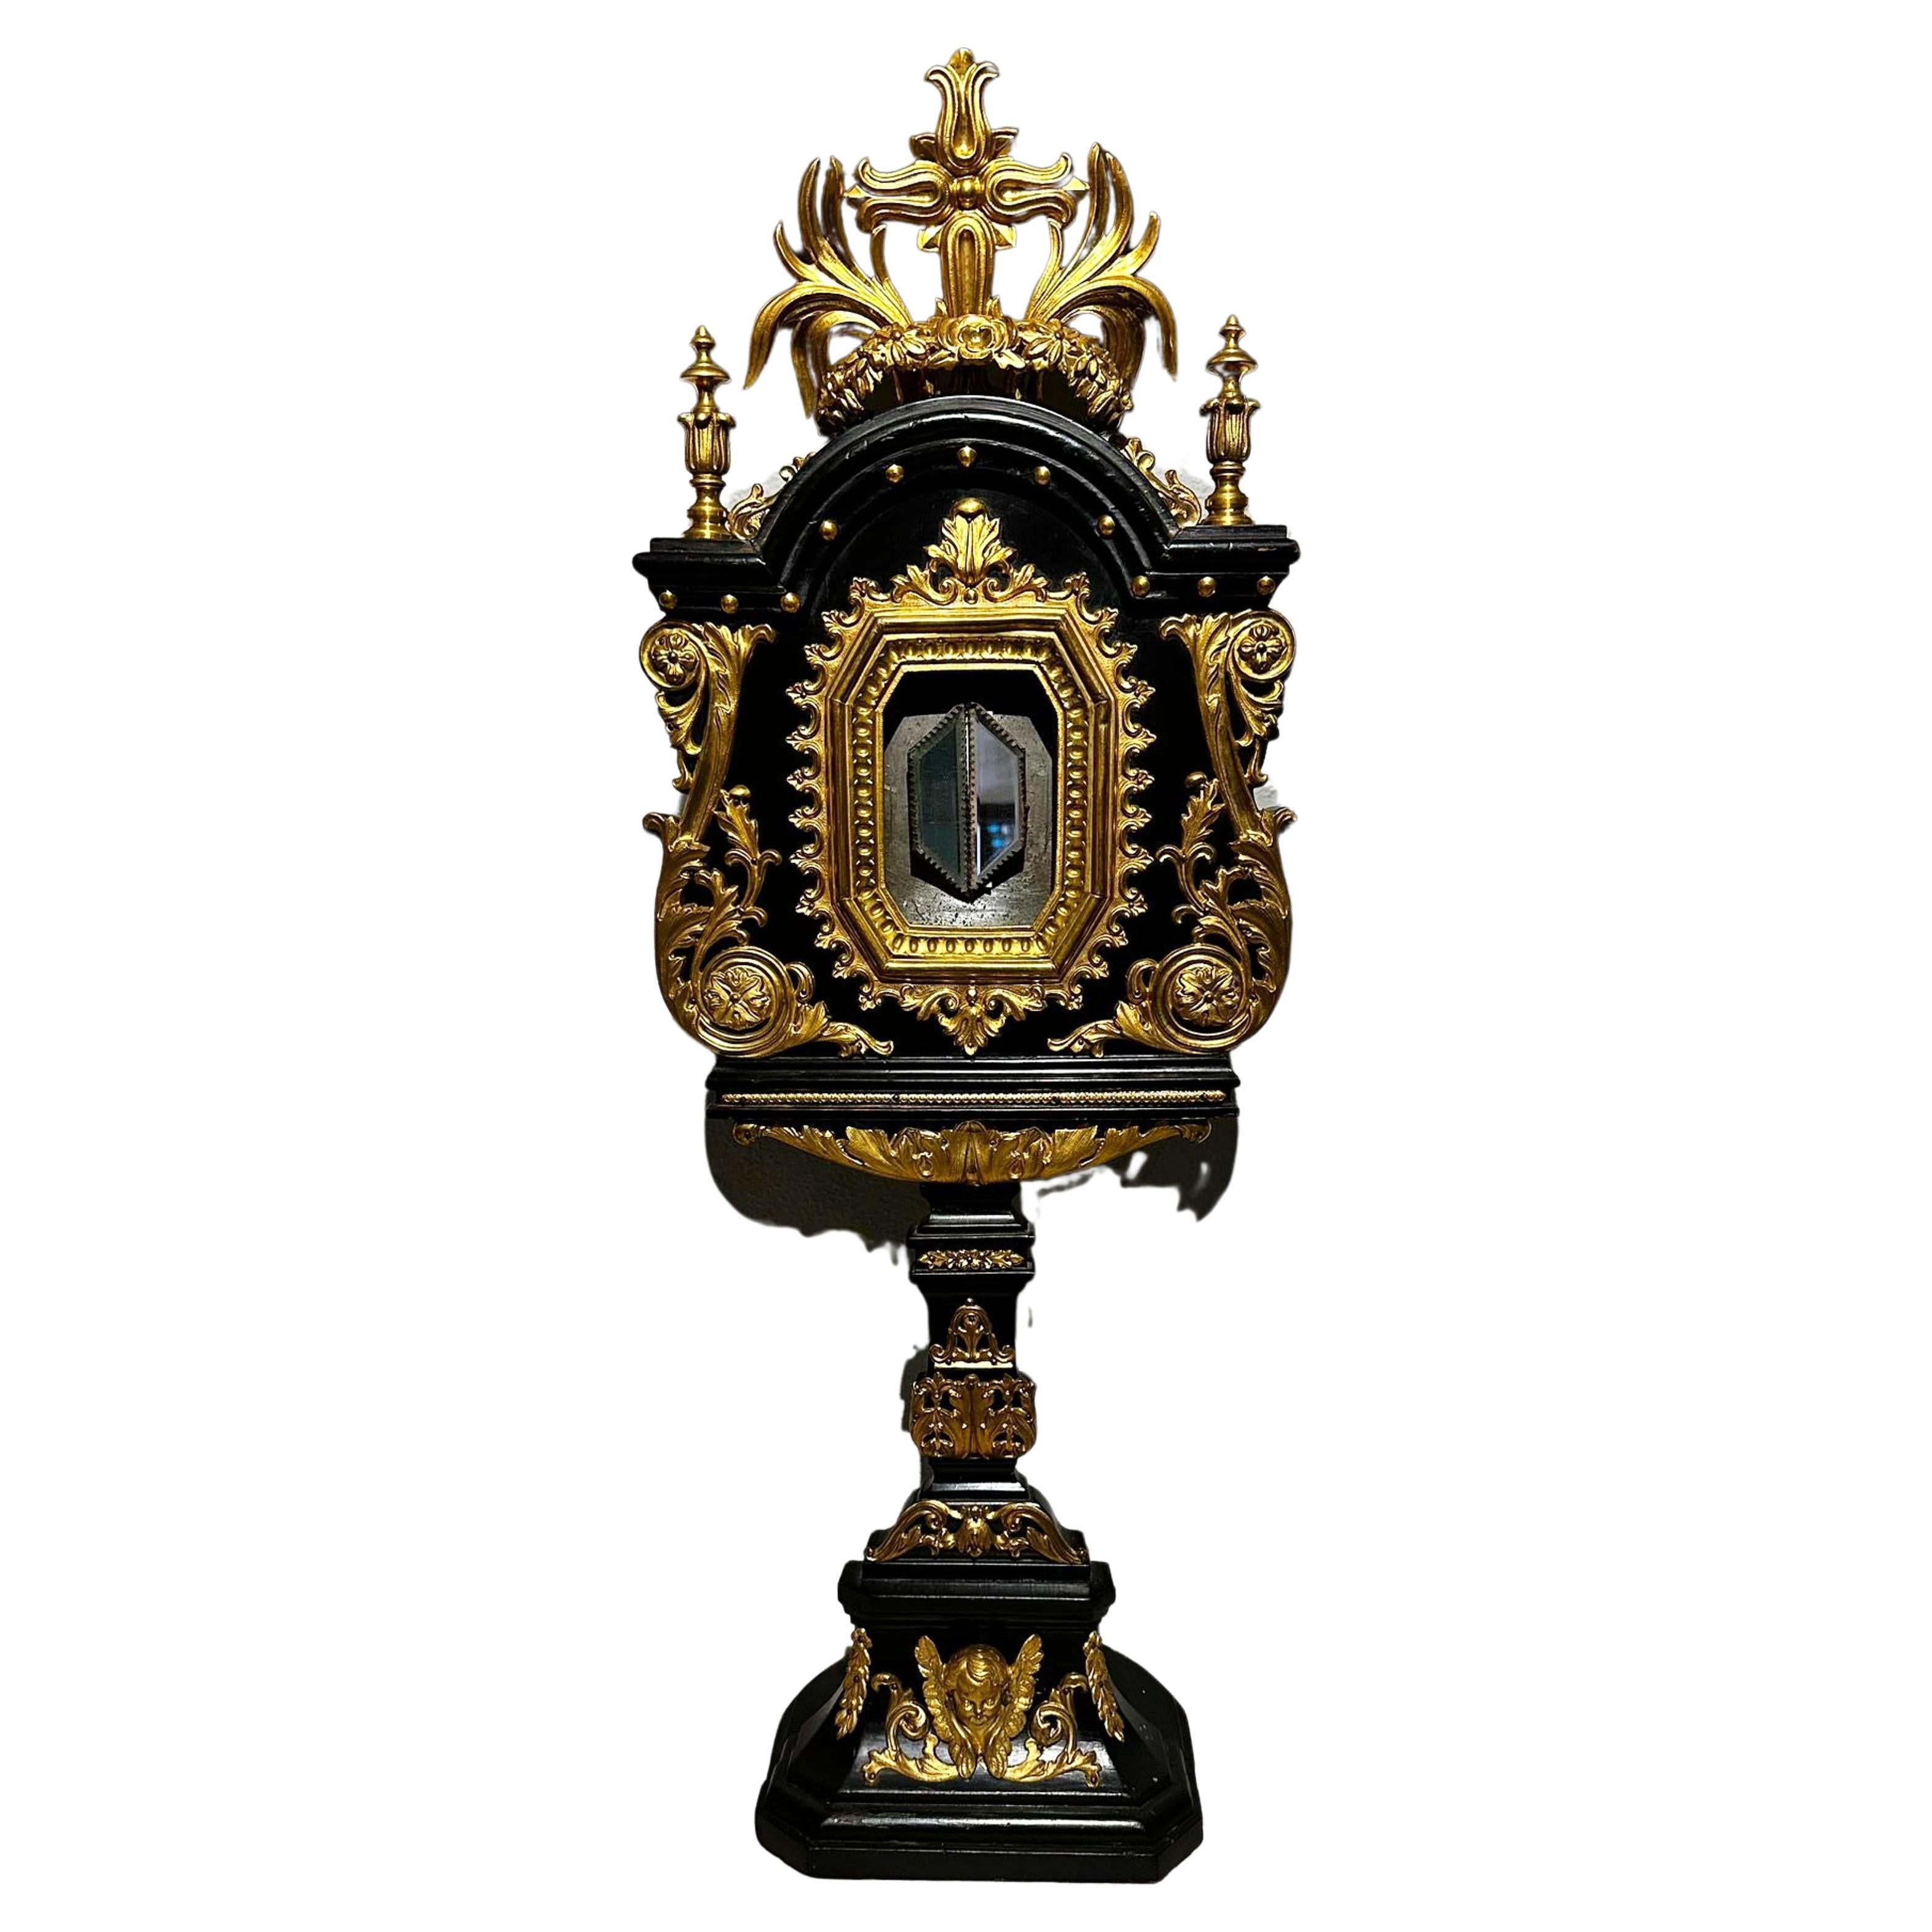 Large 19th century Italian Ebonised wooden Monstrance
with gilt brass decorations. 
Renaissance style. 
Dimensions: H 78 cm.
In good condition.